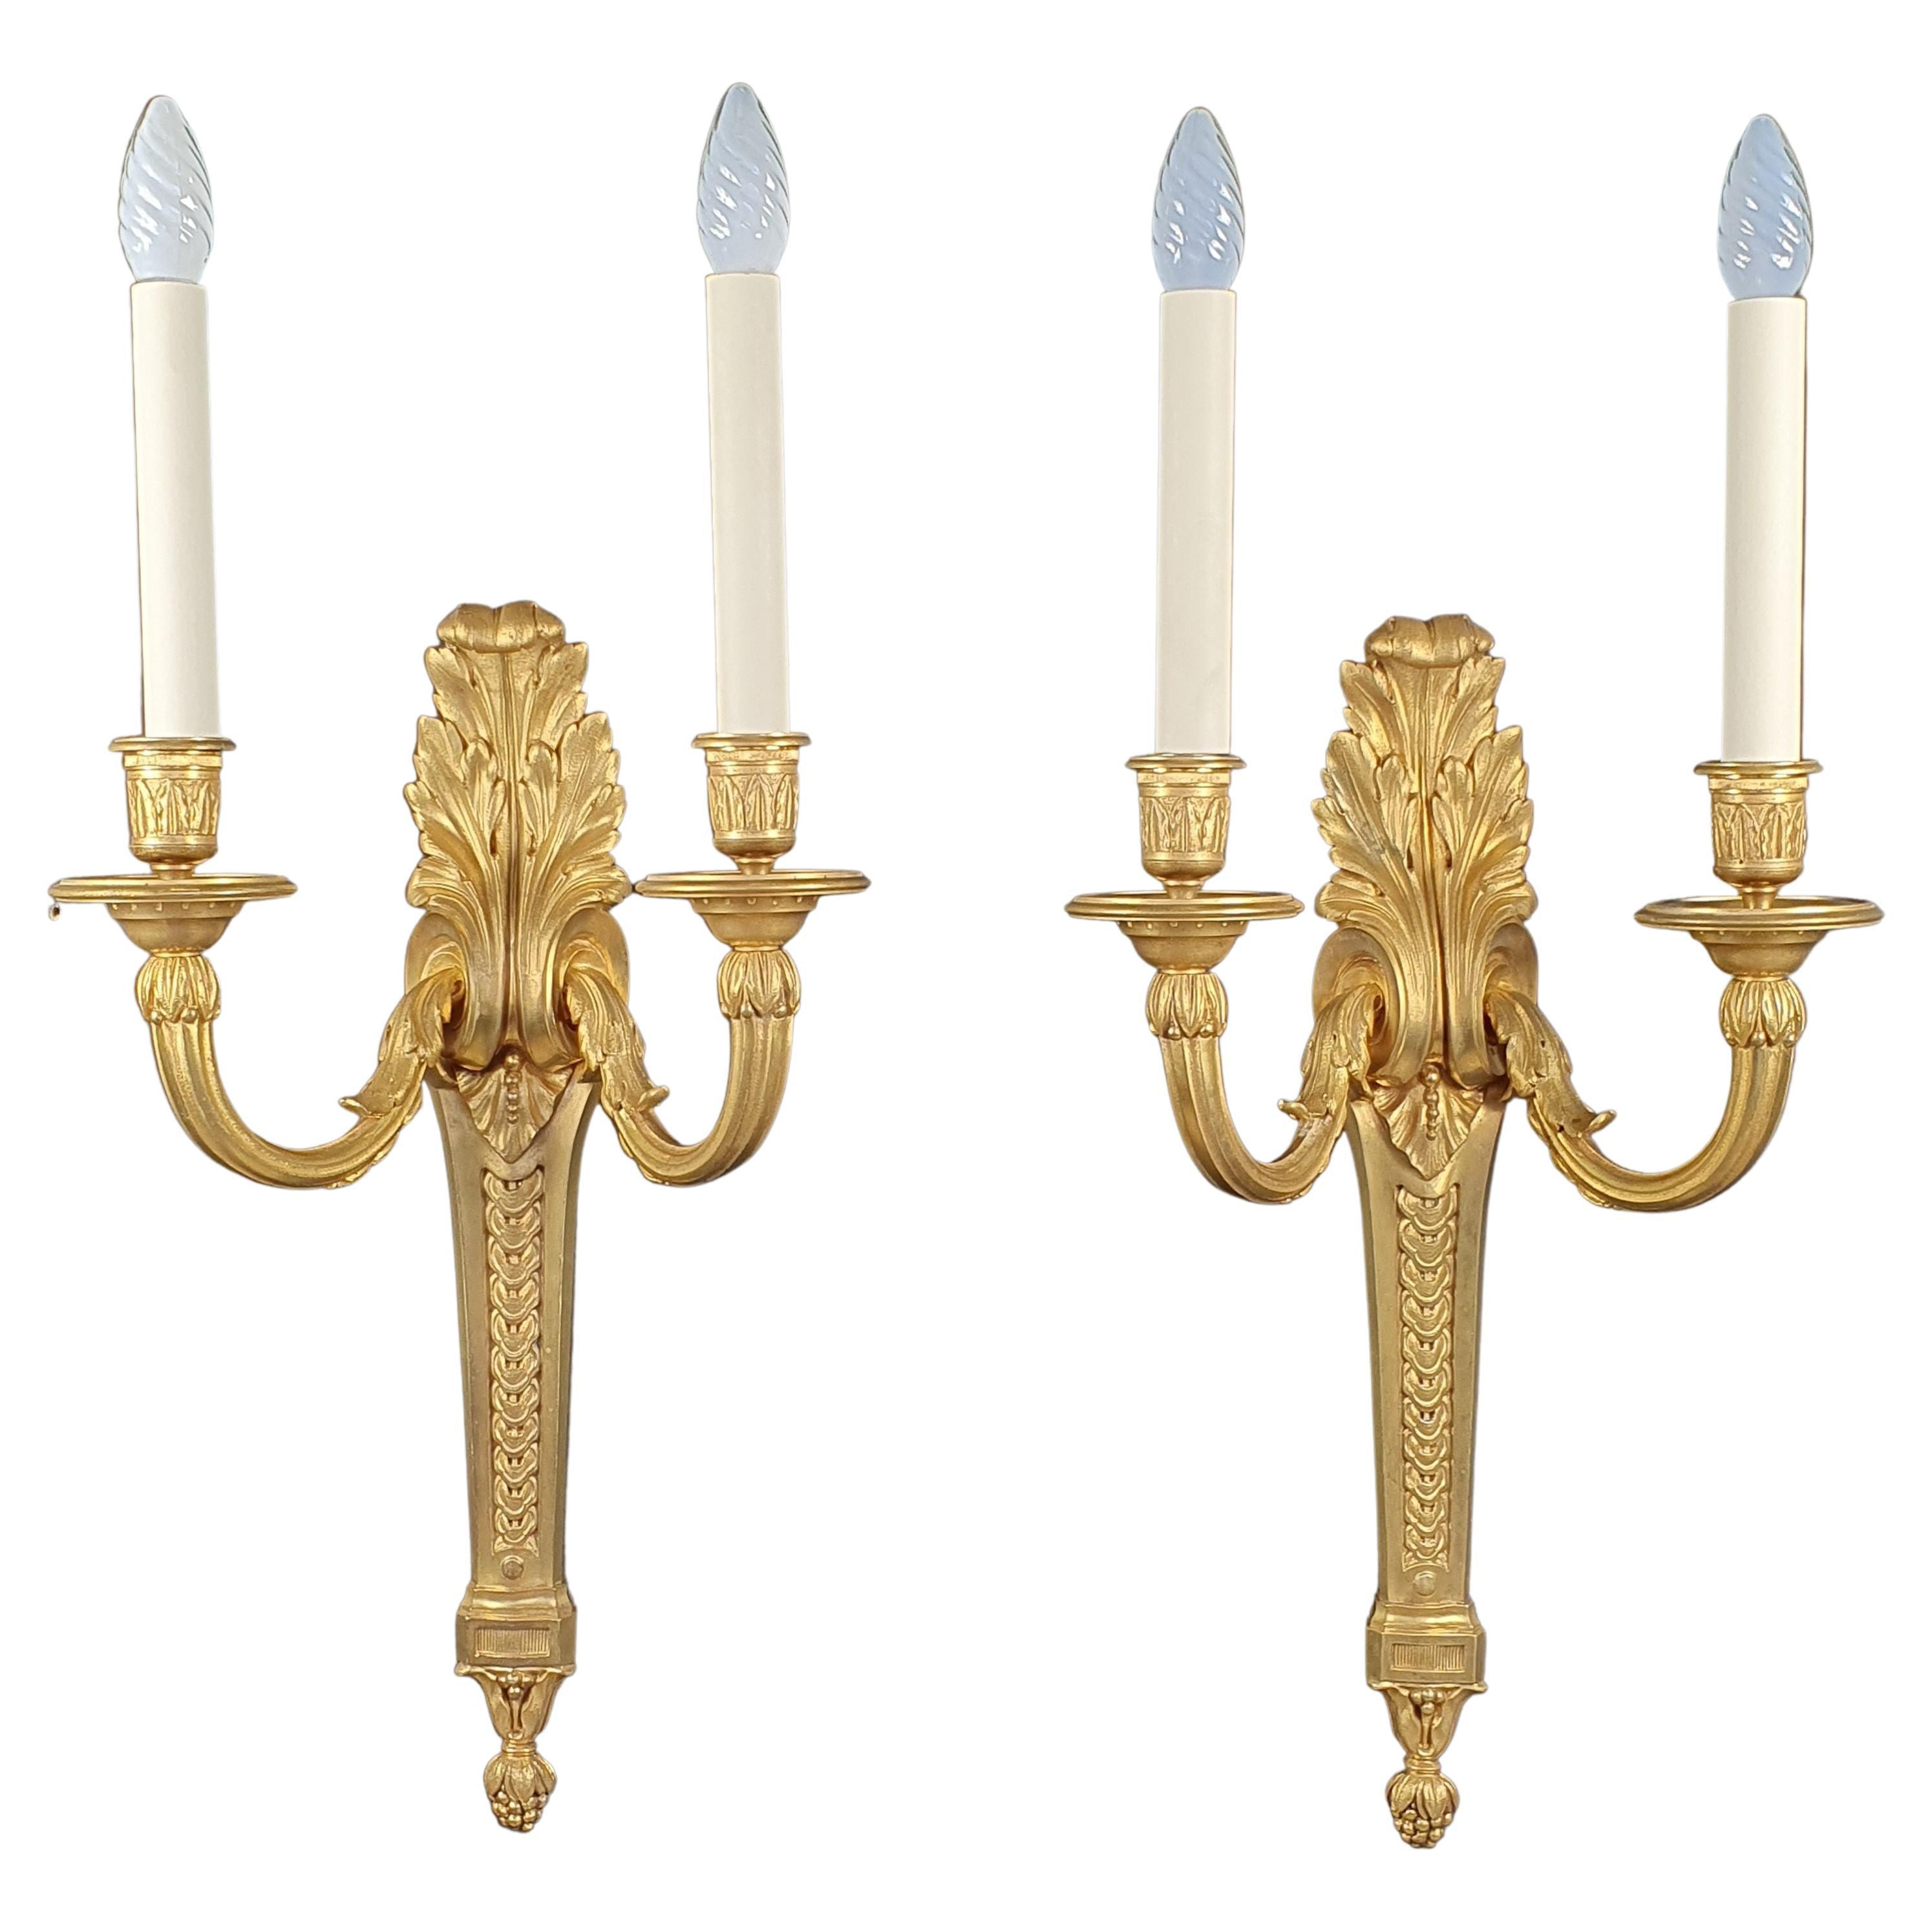 Large Pair of Transition Style Sconces 